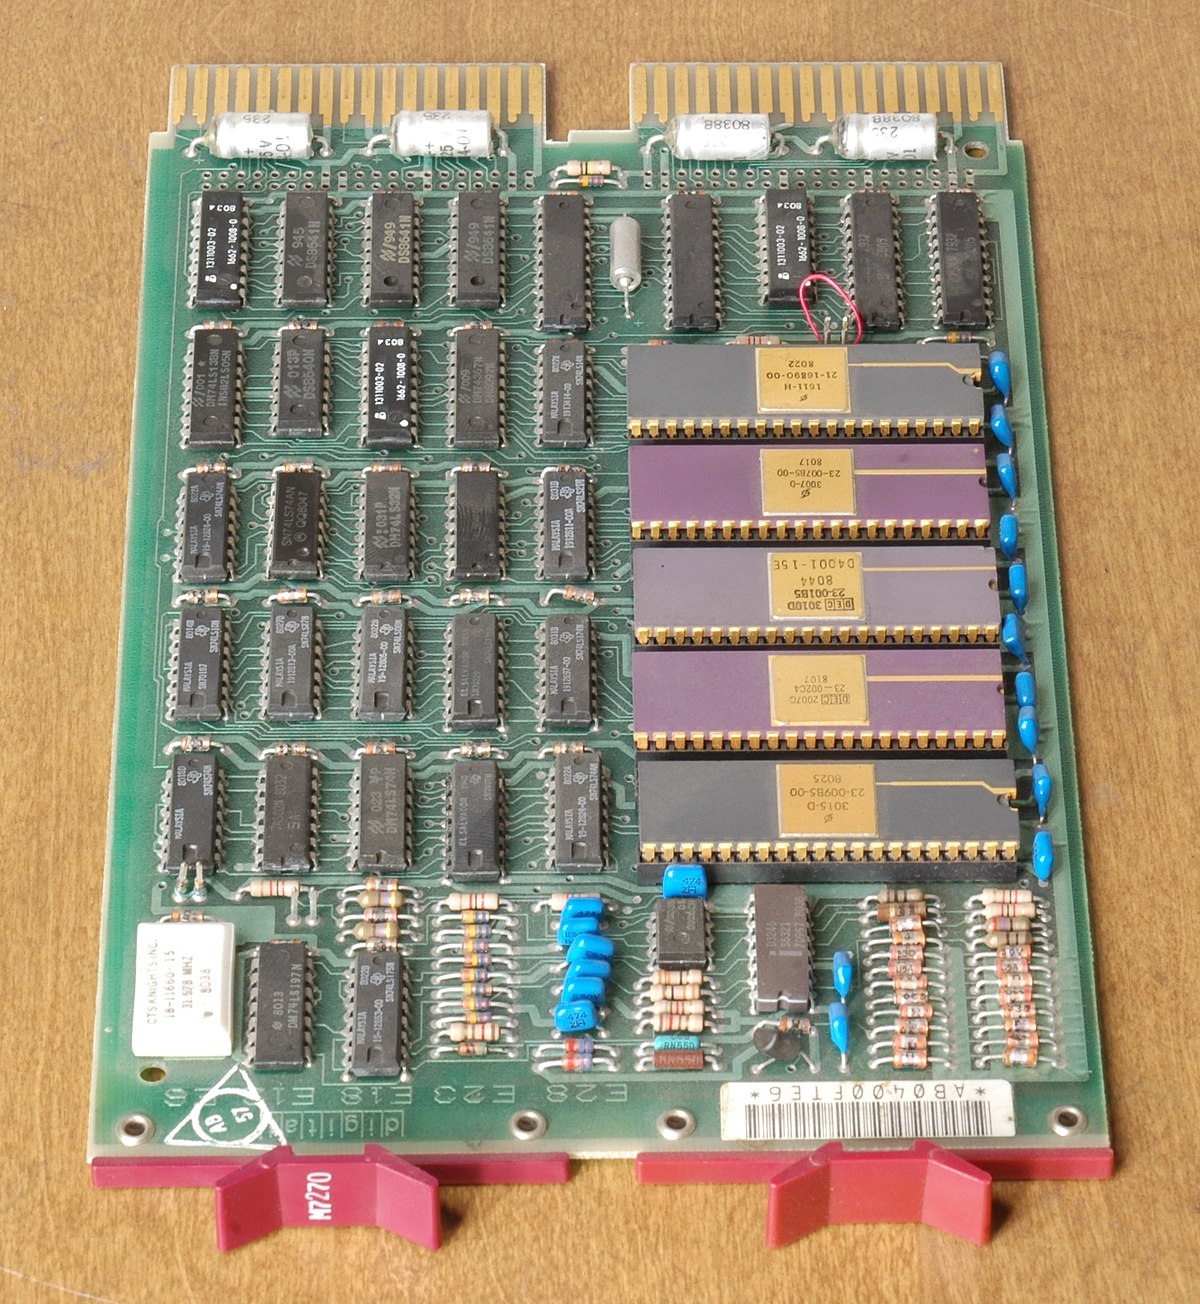 Image of a computer hardware component